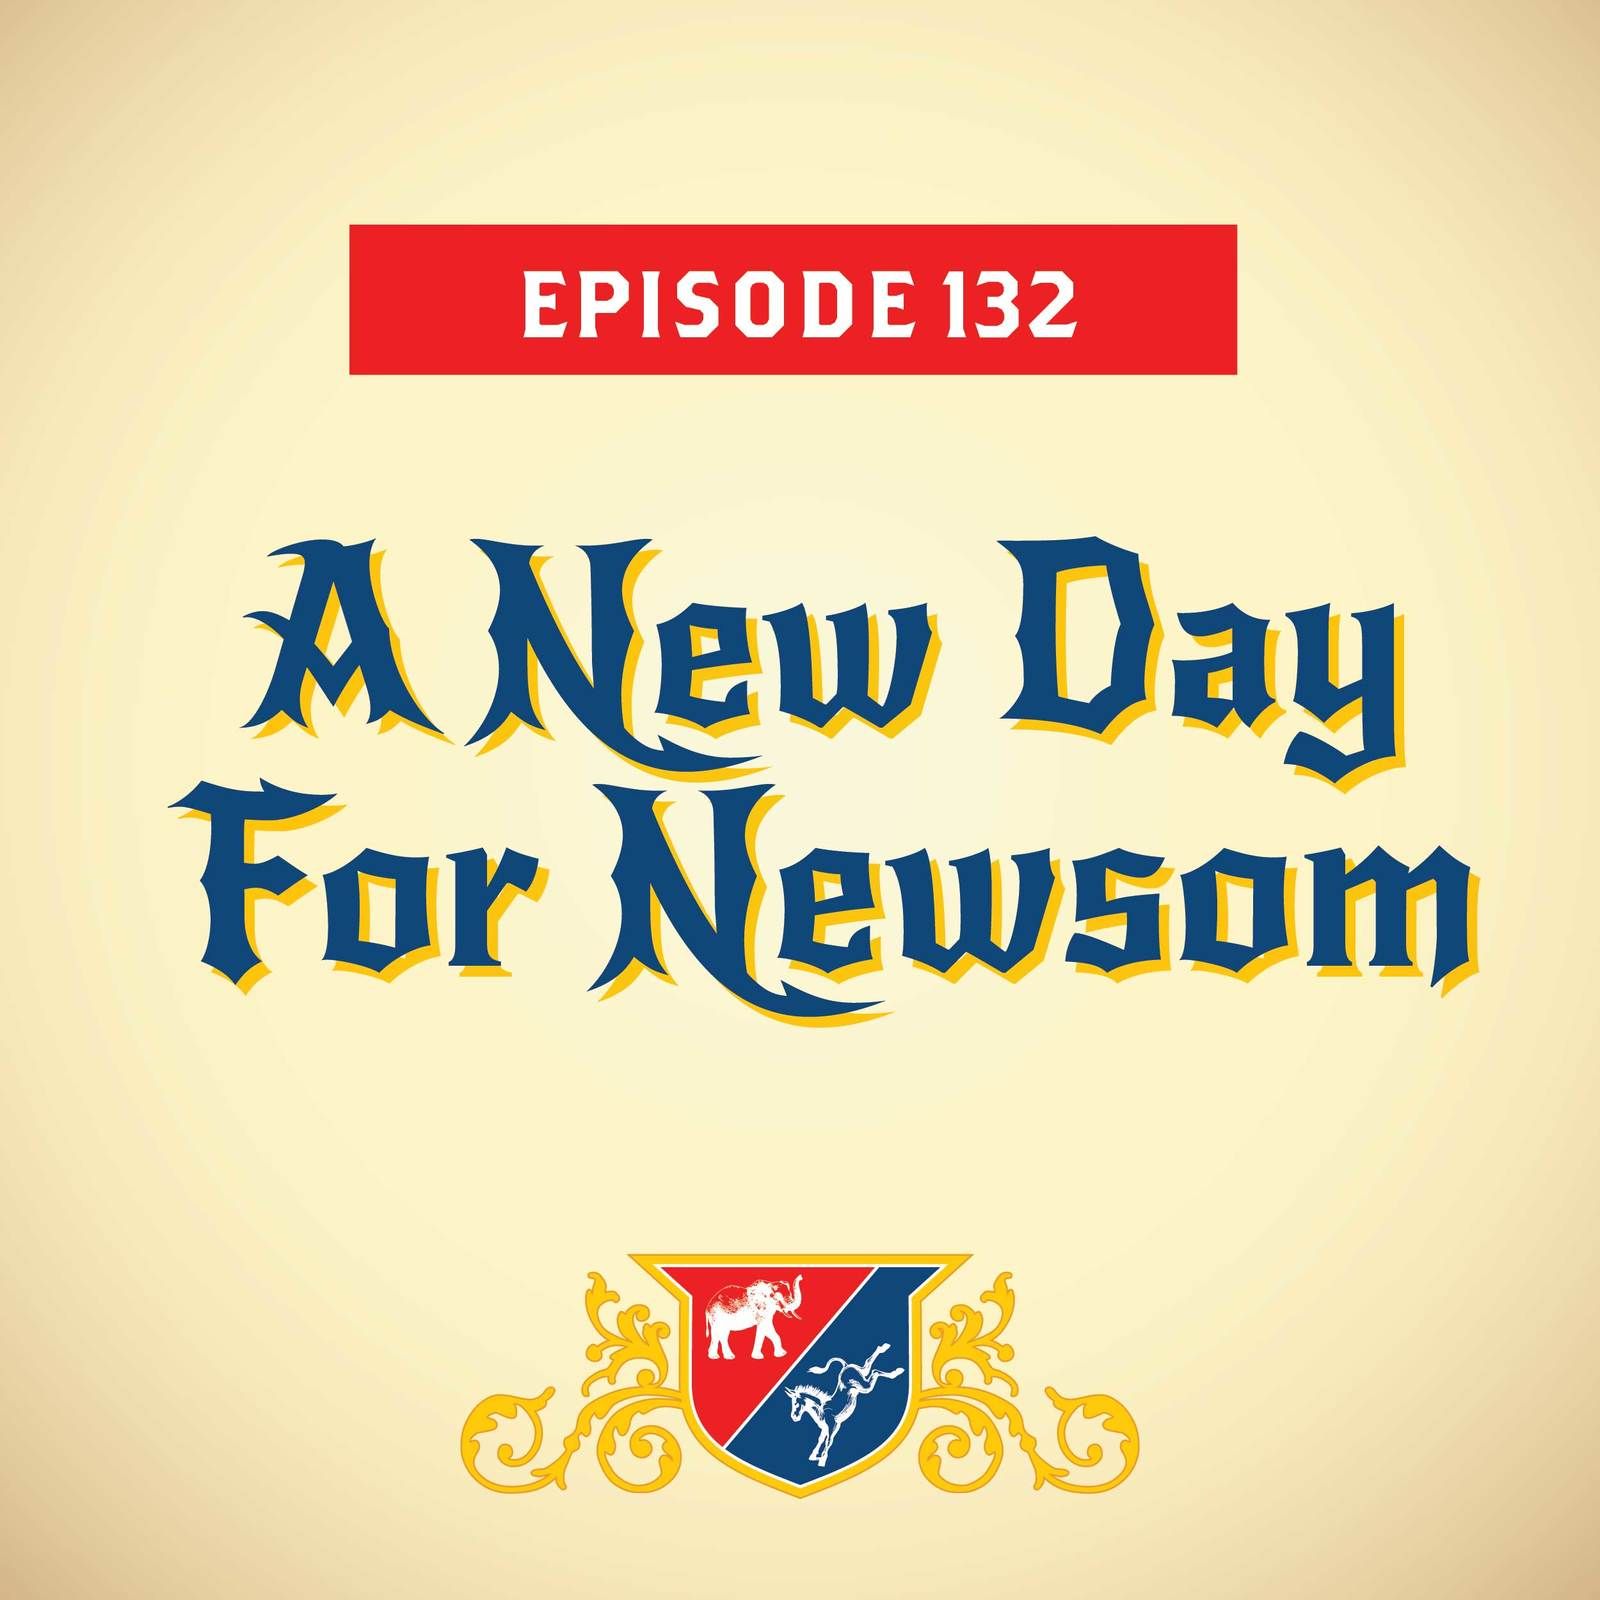 A New Day For Newsom (with Dana Bash)